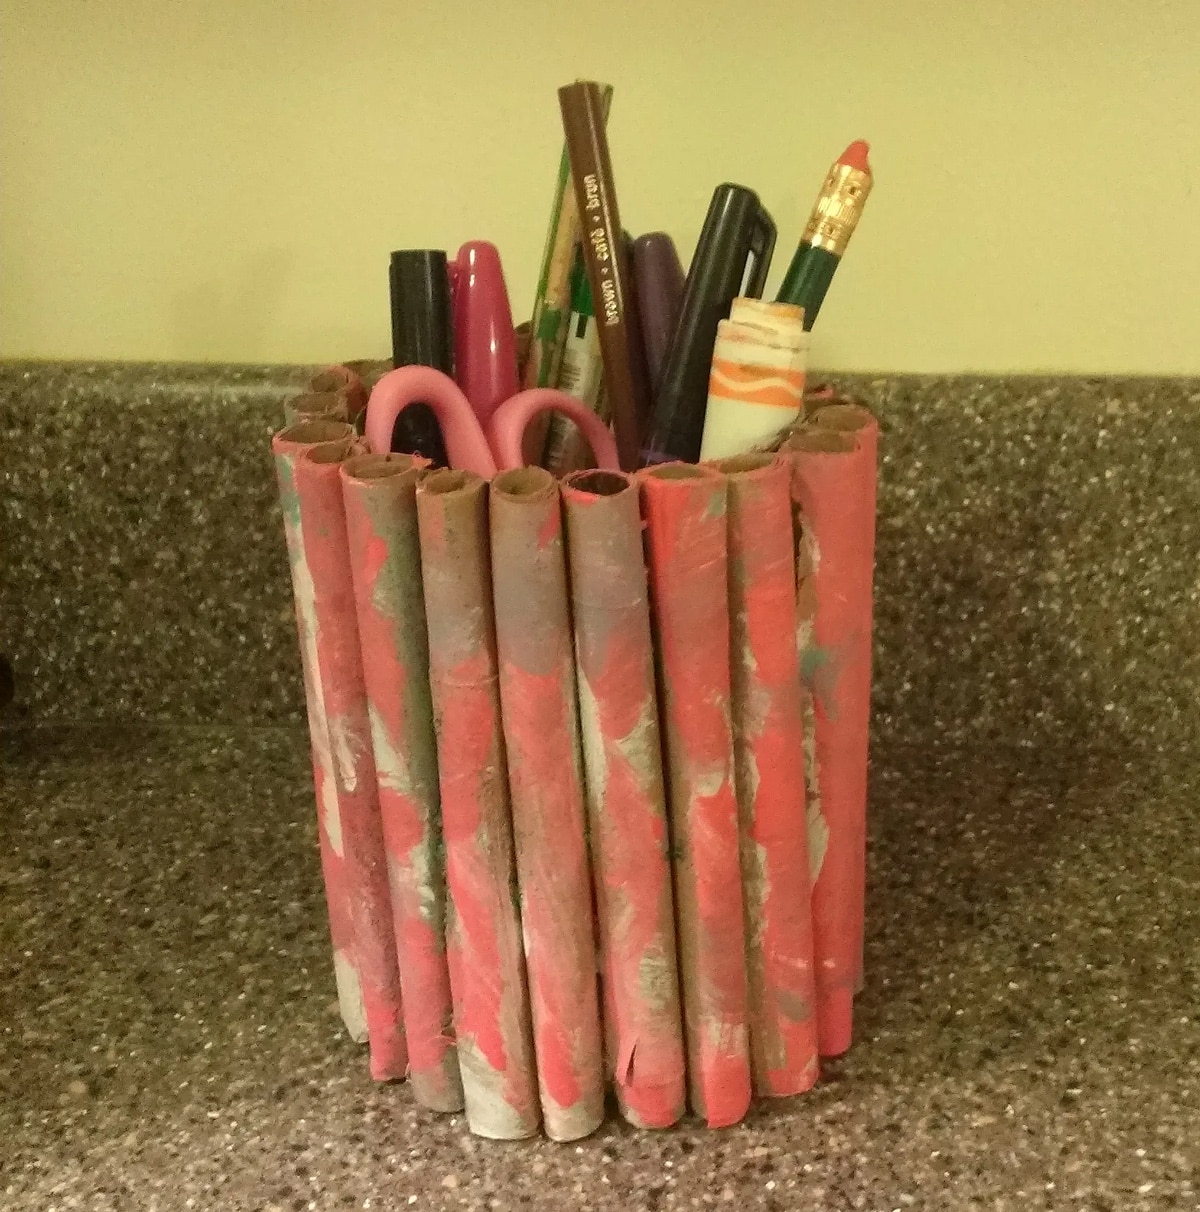 pencil holder from household materials